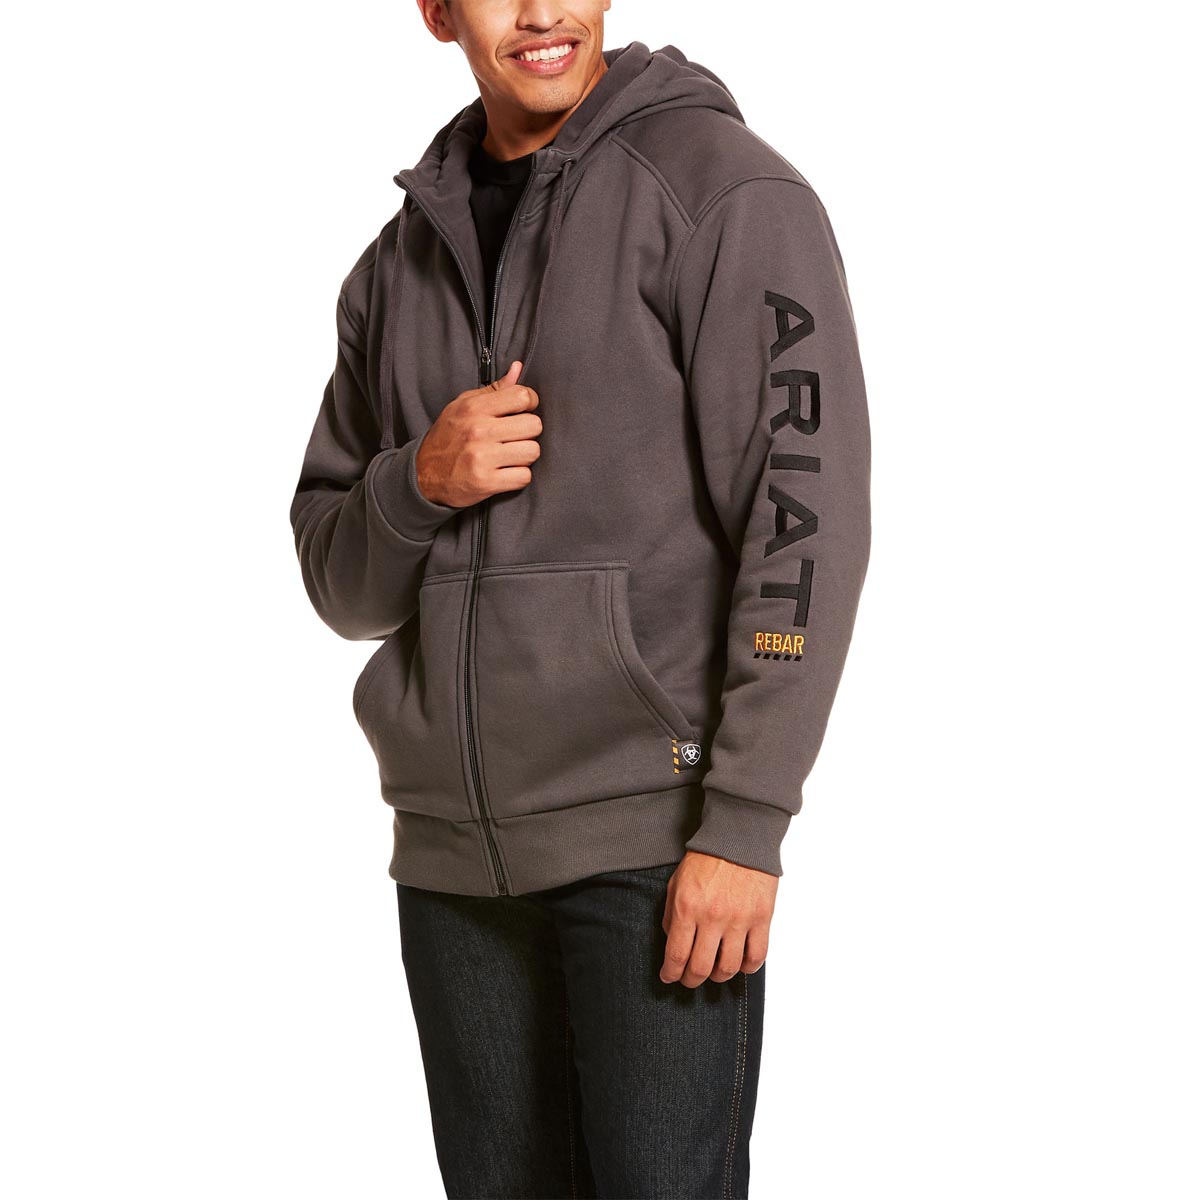 ARIAT Womens Charcoal Heather Rebar All-Weather Zip Hoodie Charcoal XX-Large